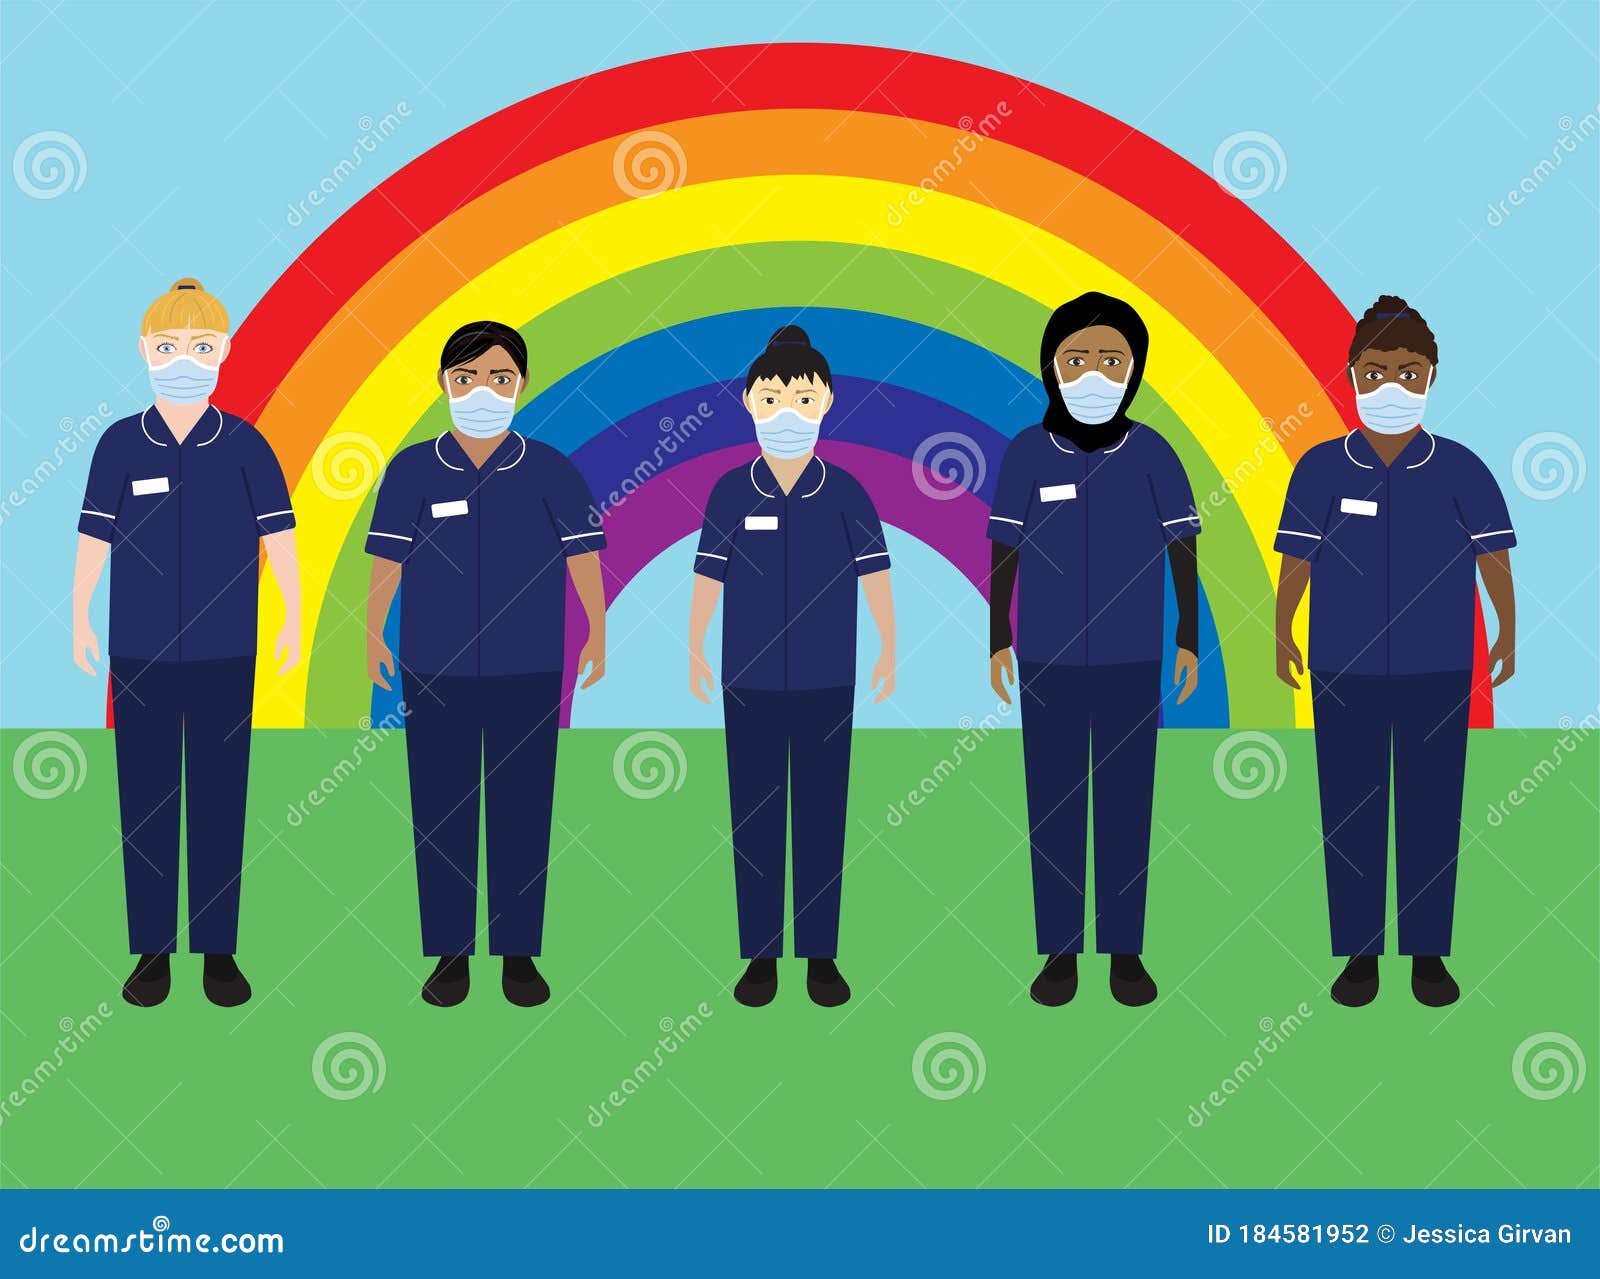 nhs hospital staff wearing face masks, standing in front of a rainbow